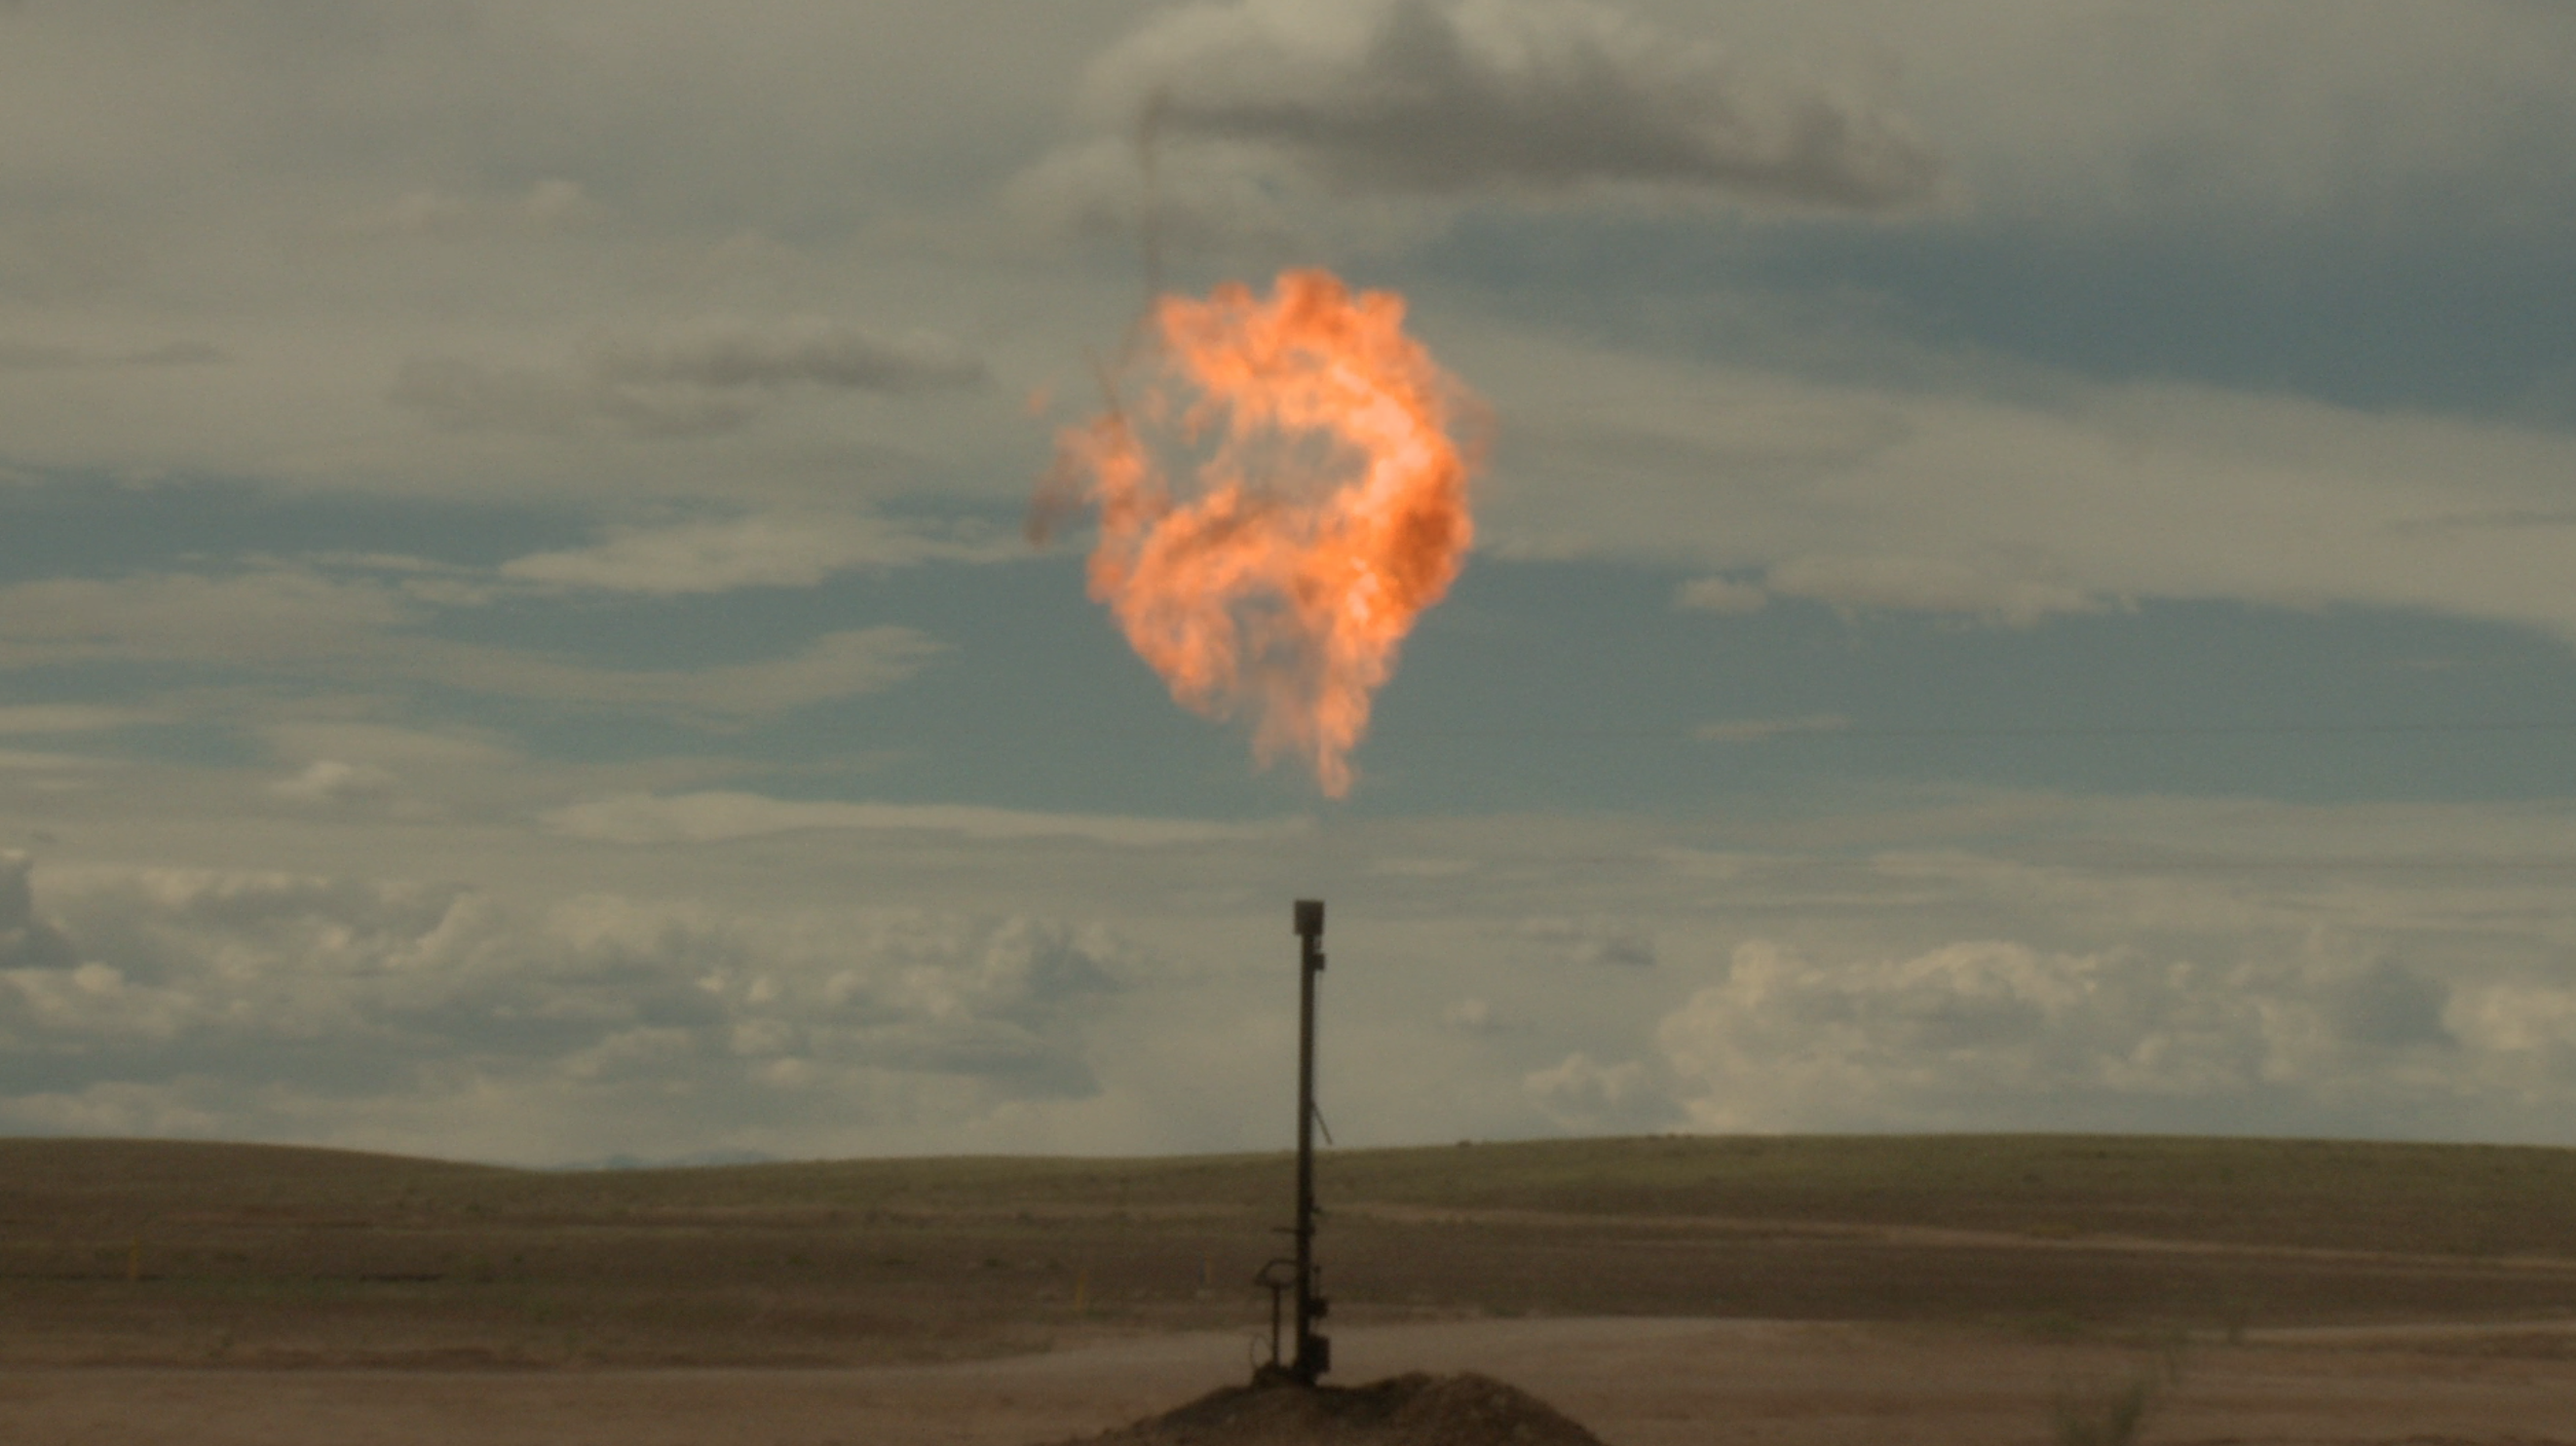 It’s Begun: More Fracking Flares on the Horizon as House Overturns Methane Emission Rule